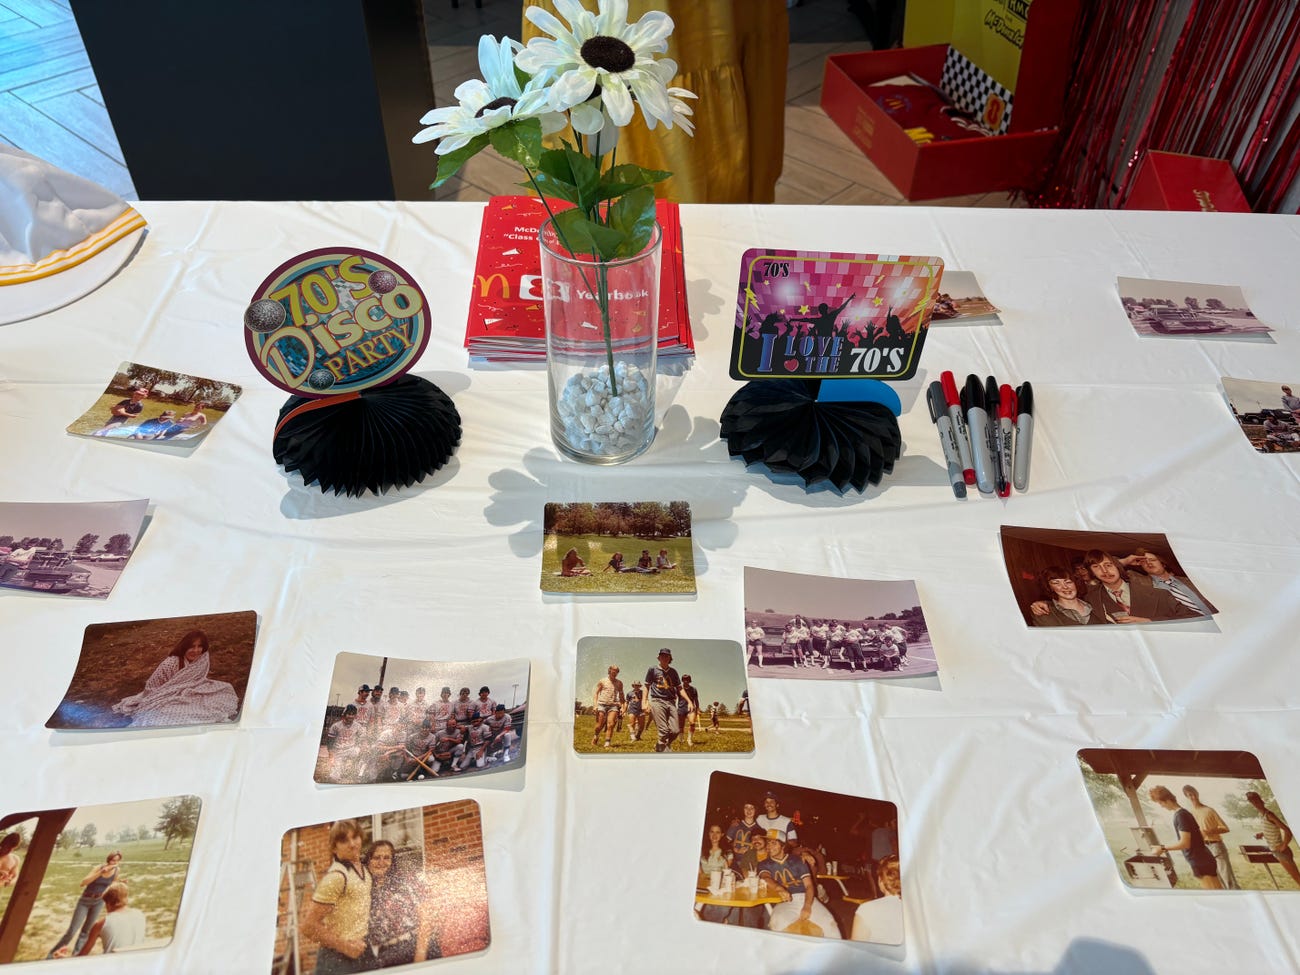 A table decorated with photos of former McDonald's workers and 70s items